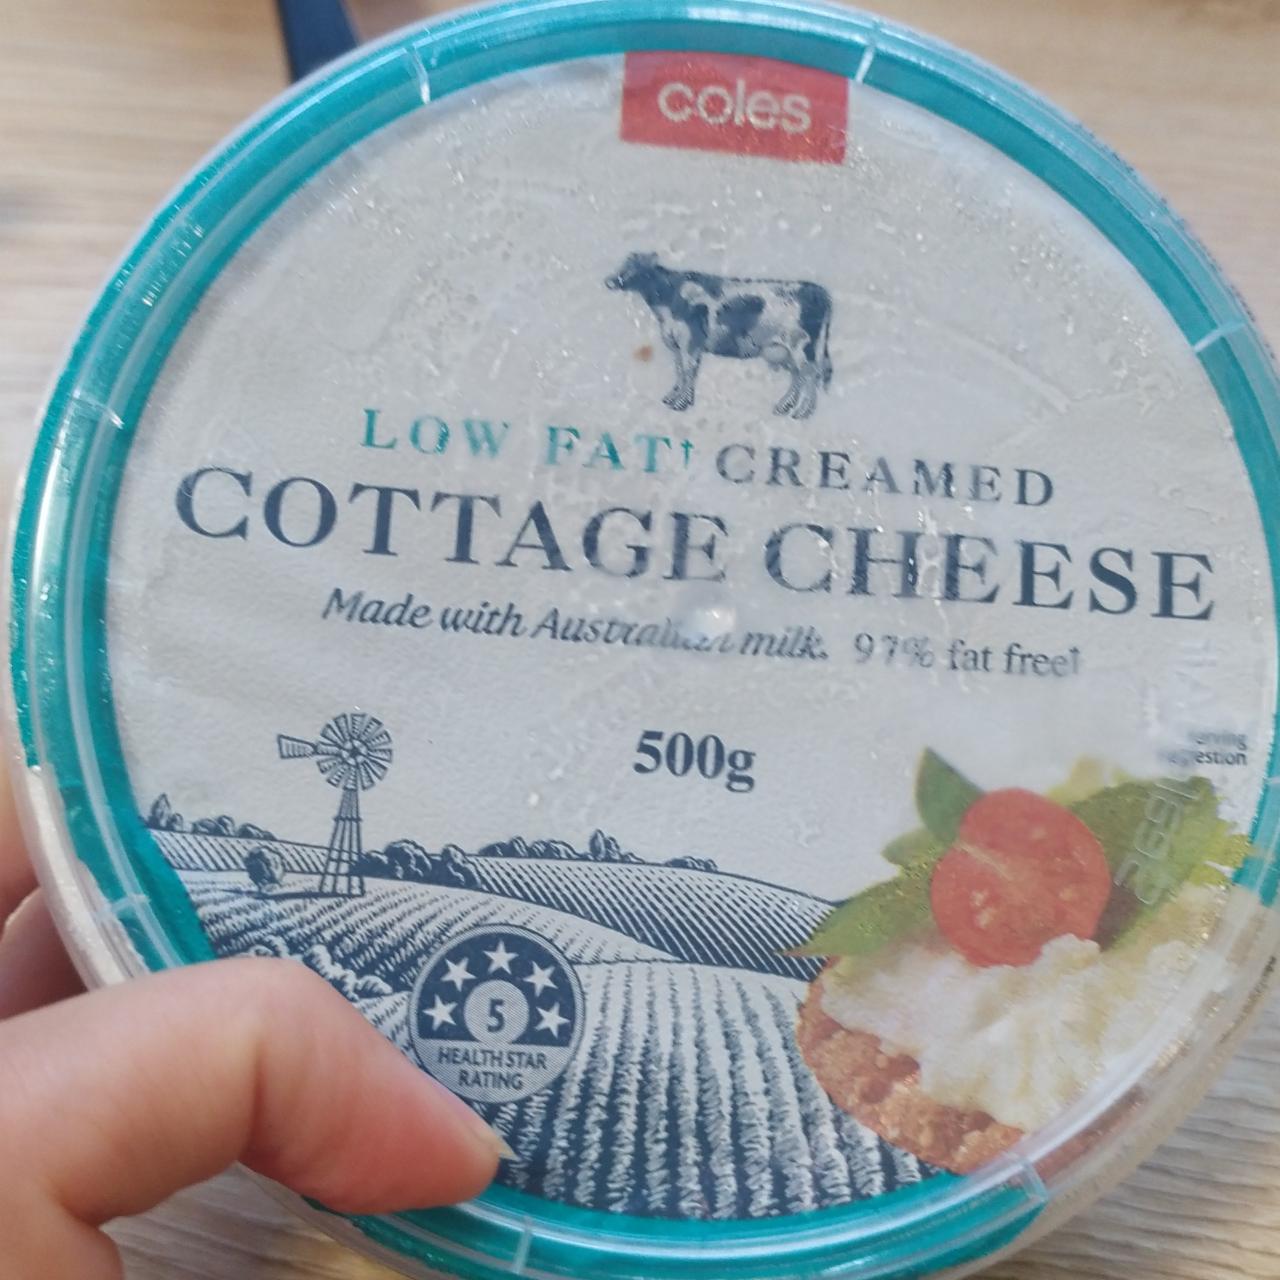 Fotografie - Low fat Creamed Cottage cheese Coles